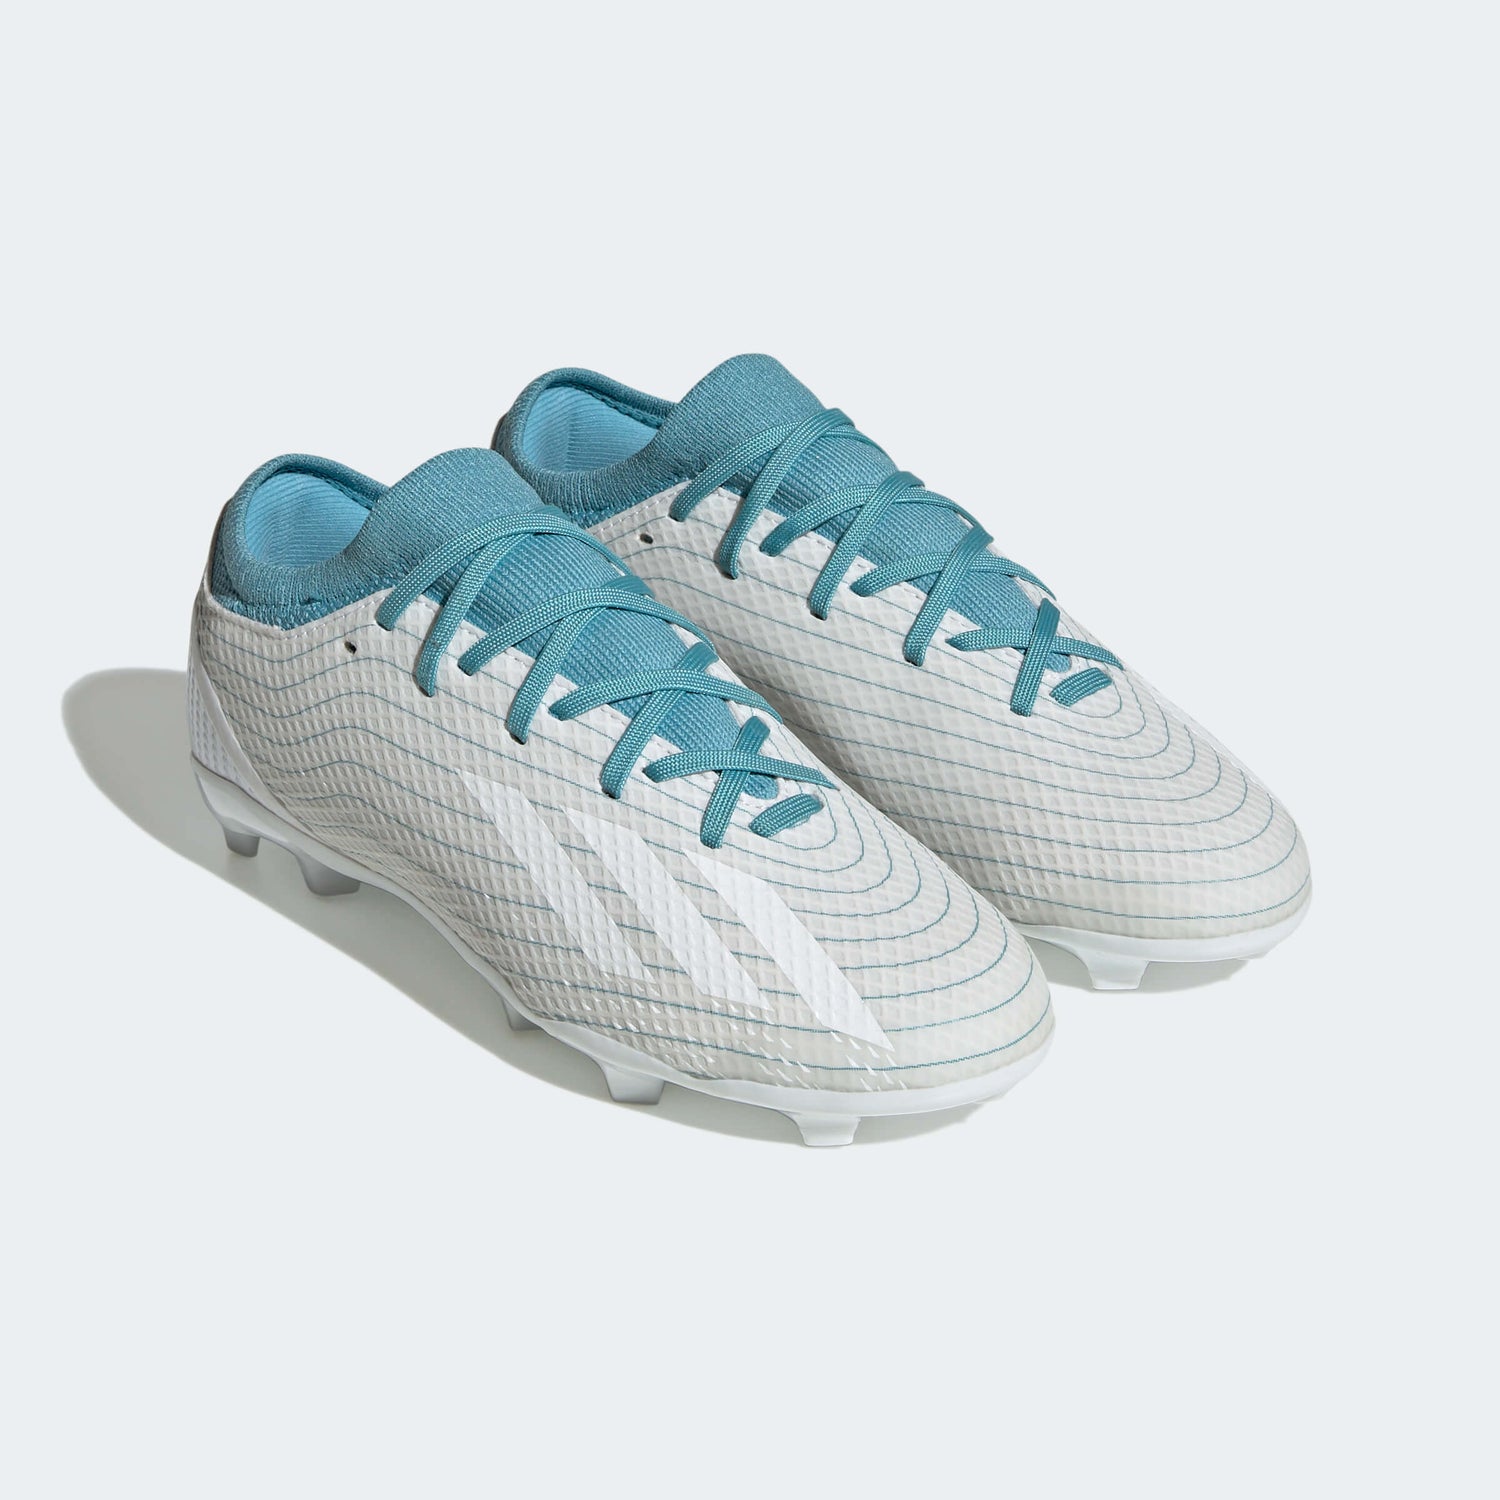 adidas JR X Speedportal .3 FG - Parley Pack (SP23) (Pair - Front Lateral)